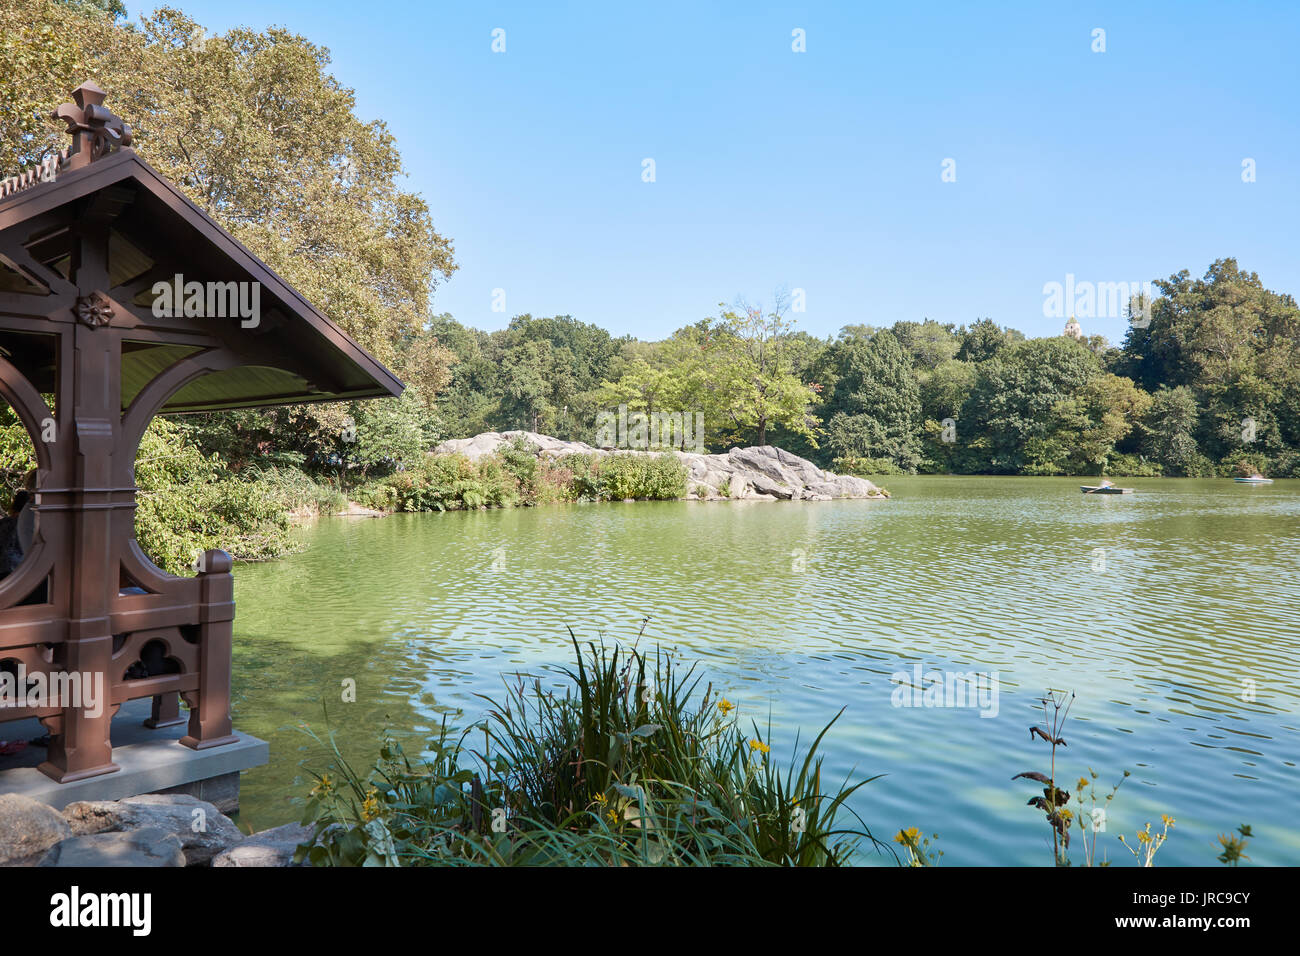 Central Park pond view and wooden canopy in a sunny day in New York Stock Photo